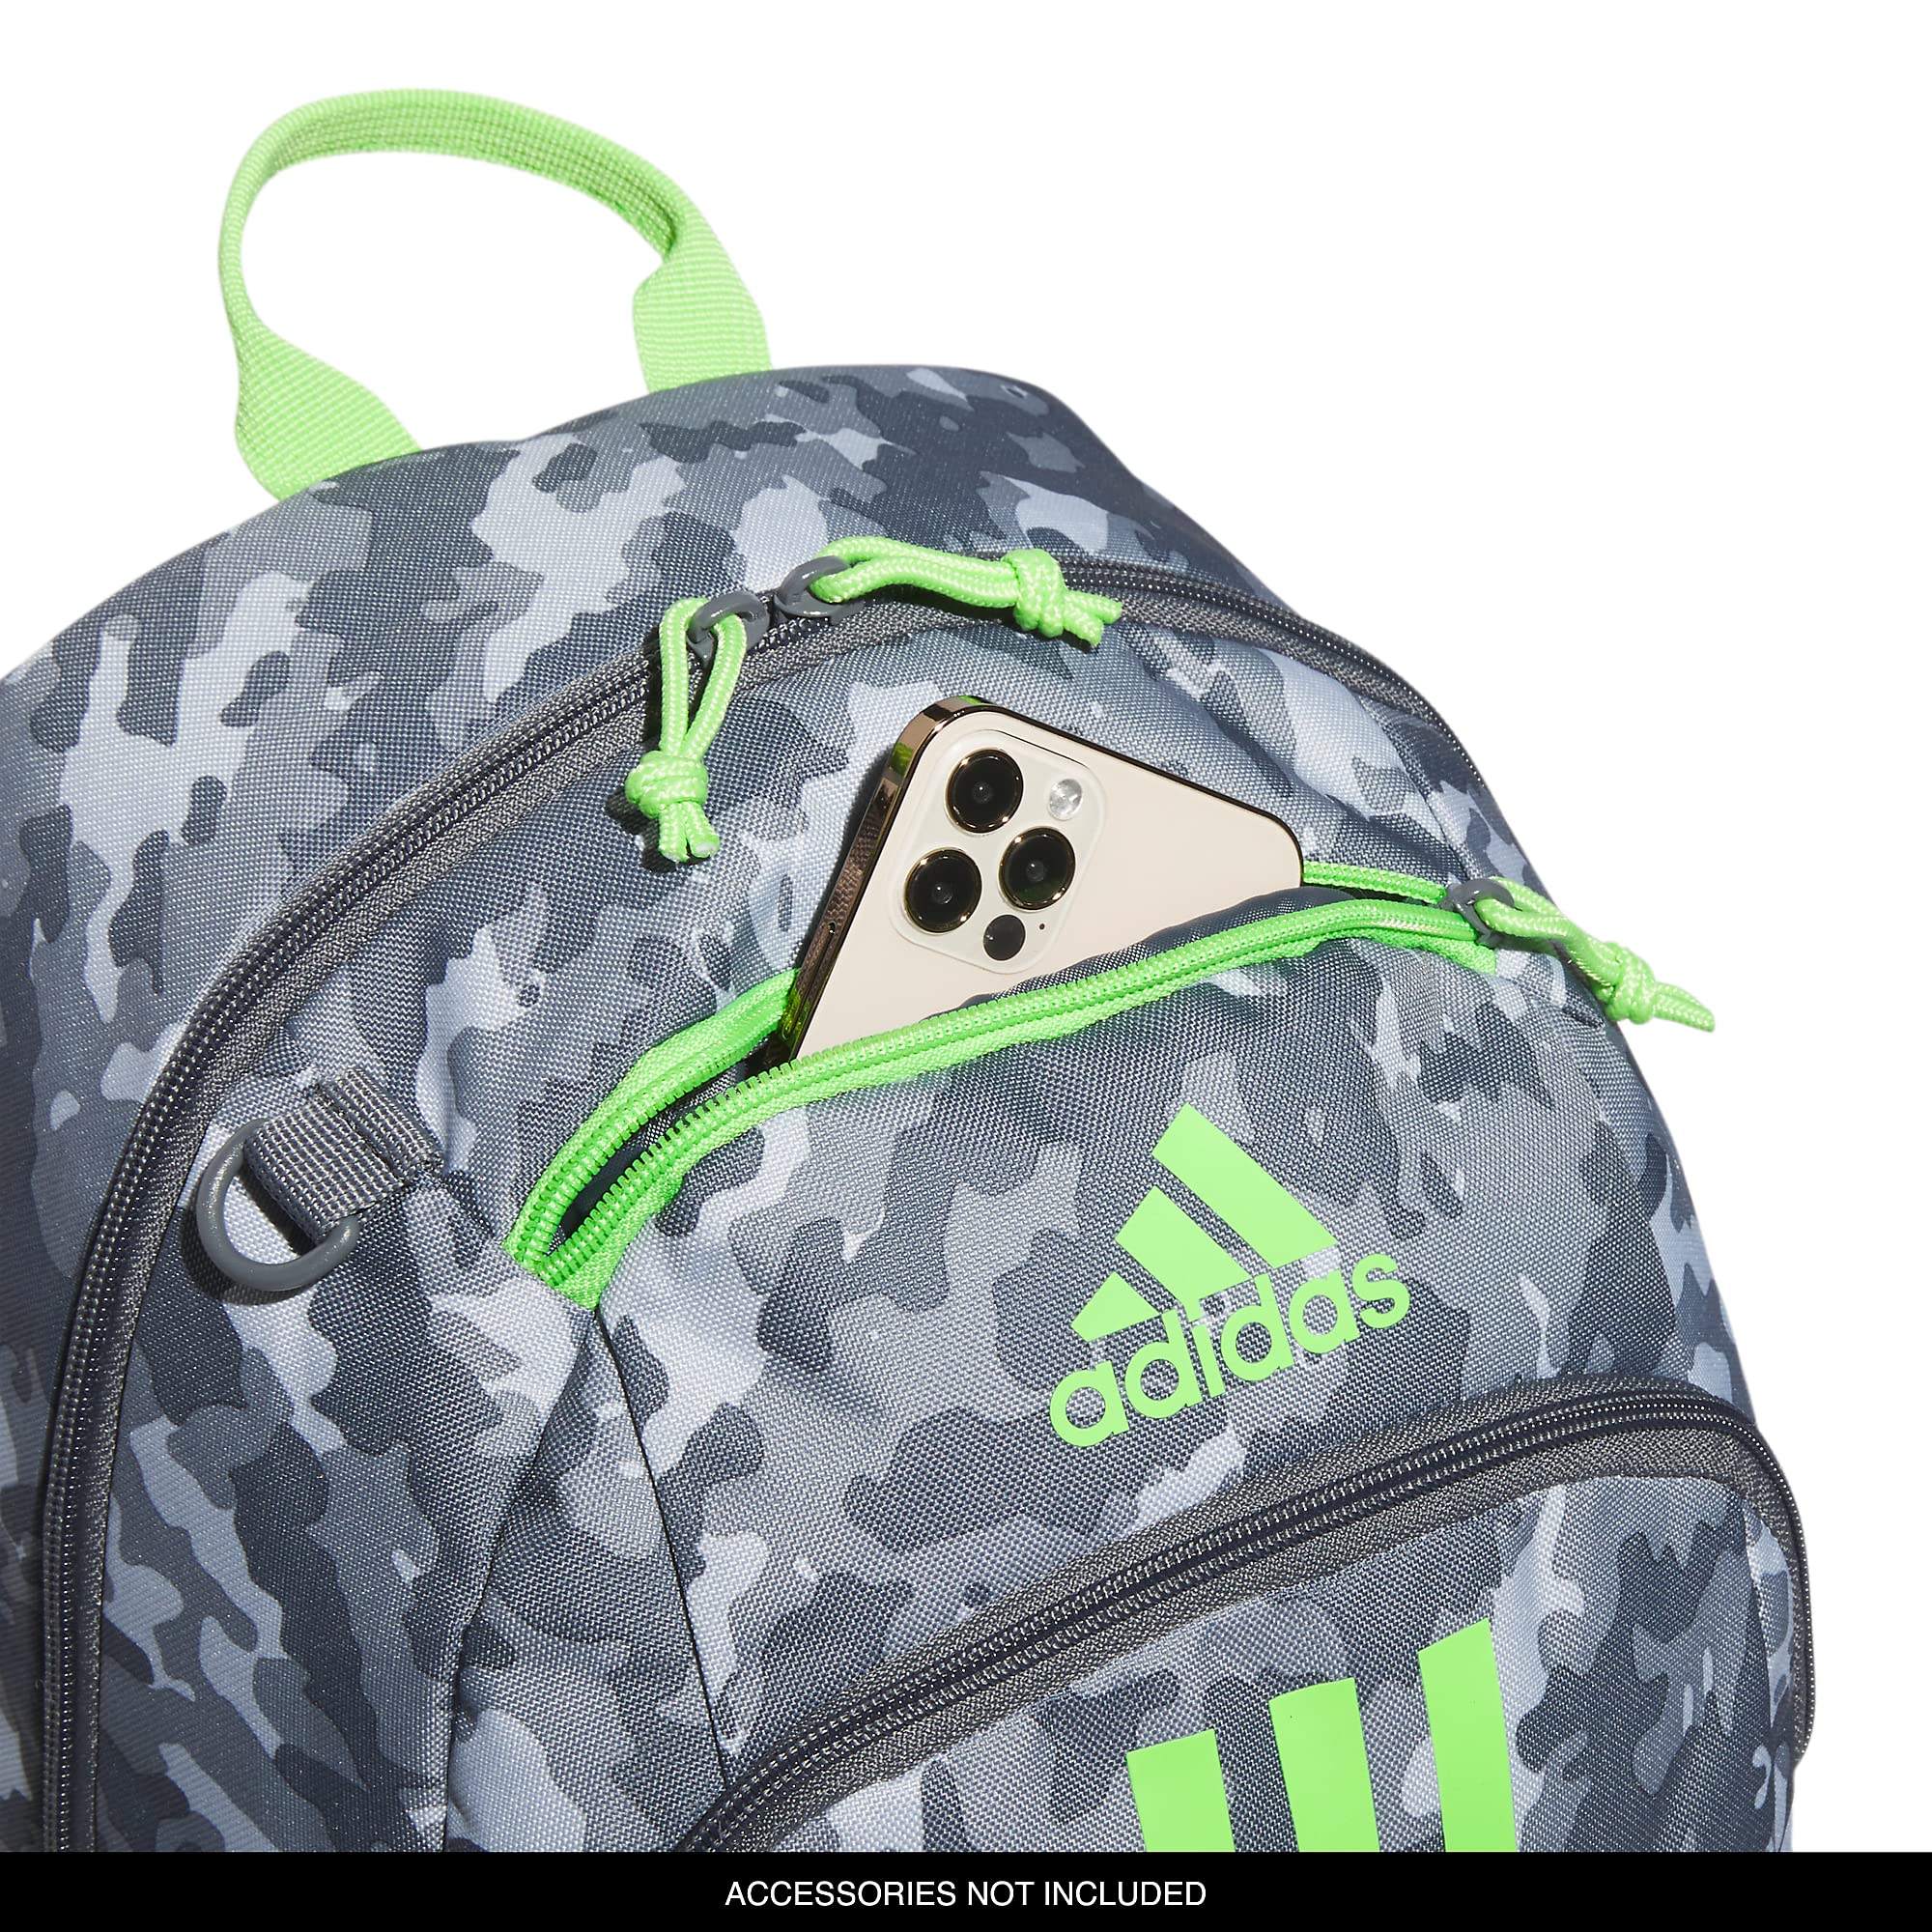 adidas Creator 2 Backpack, Essential Camo Grey/Lucid Lime Green/Onix Grey, One Size